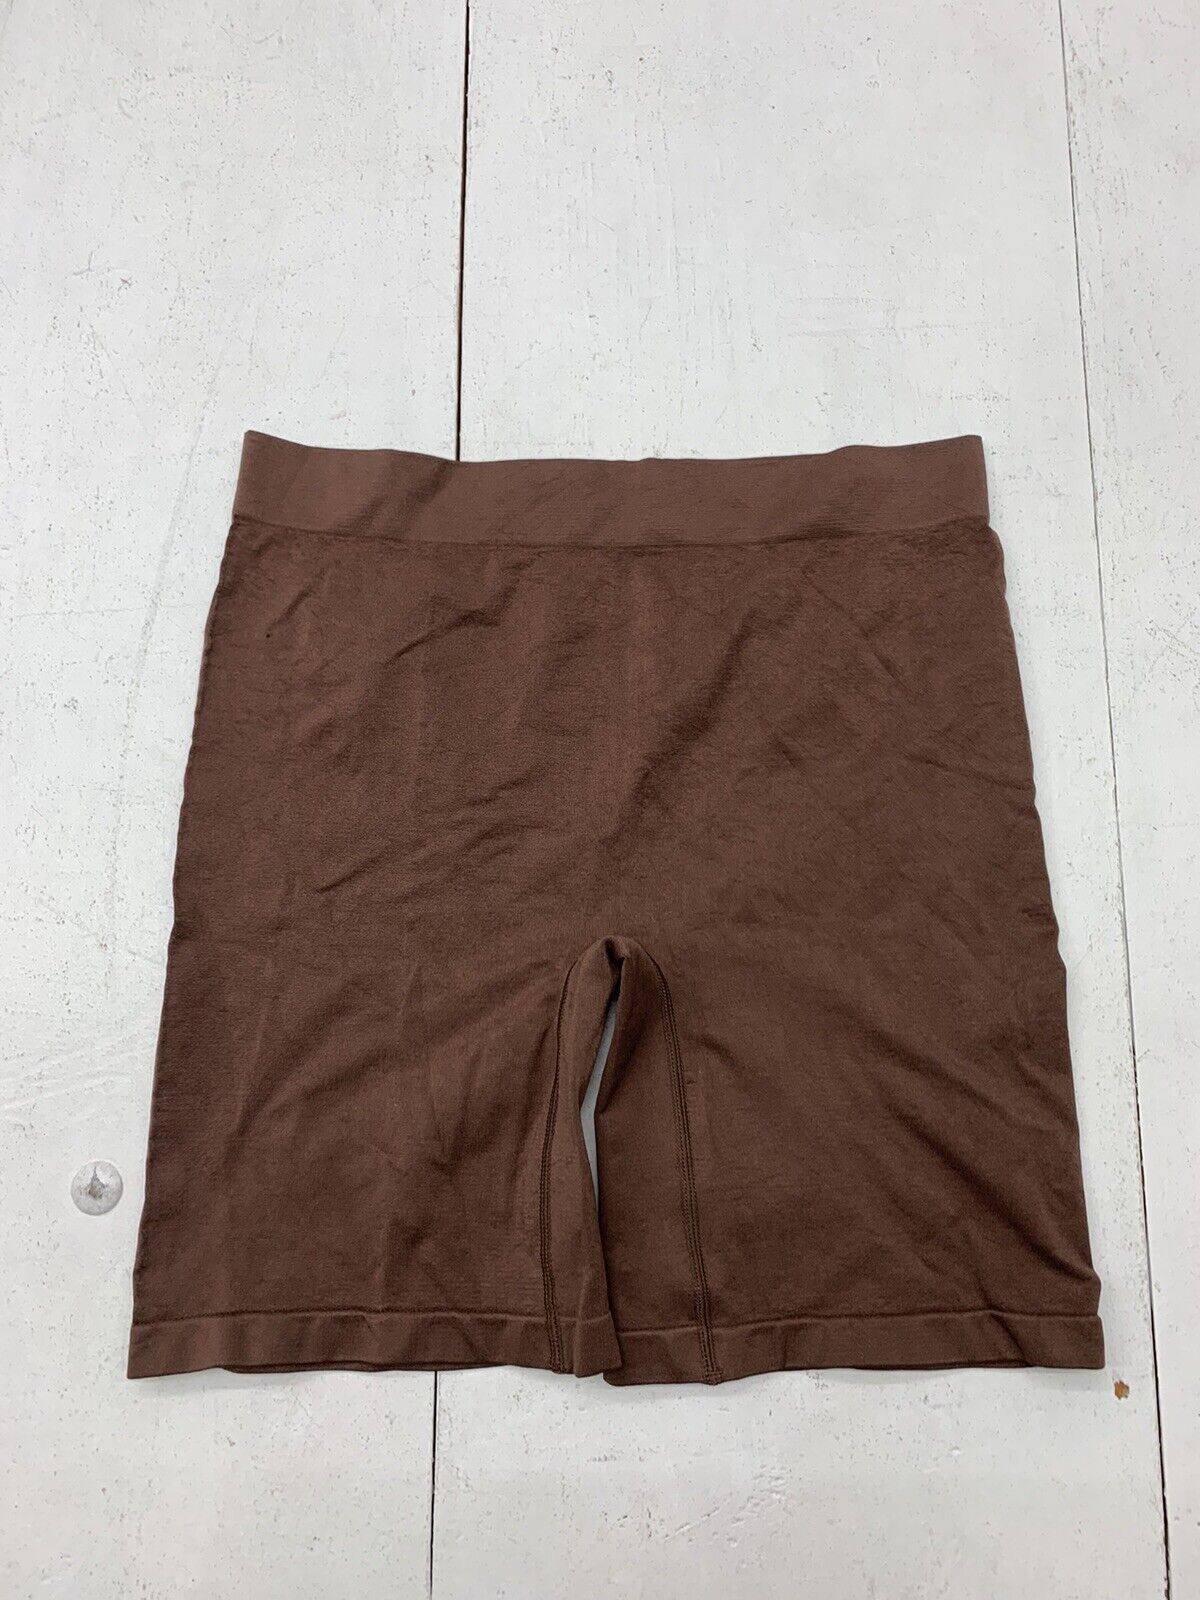 Unbranded Womens Brown Athletic Shorts Size 3XL